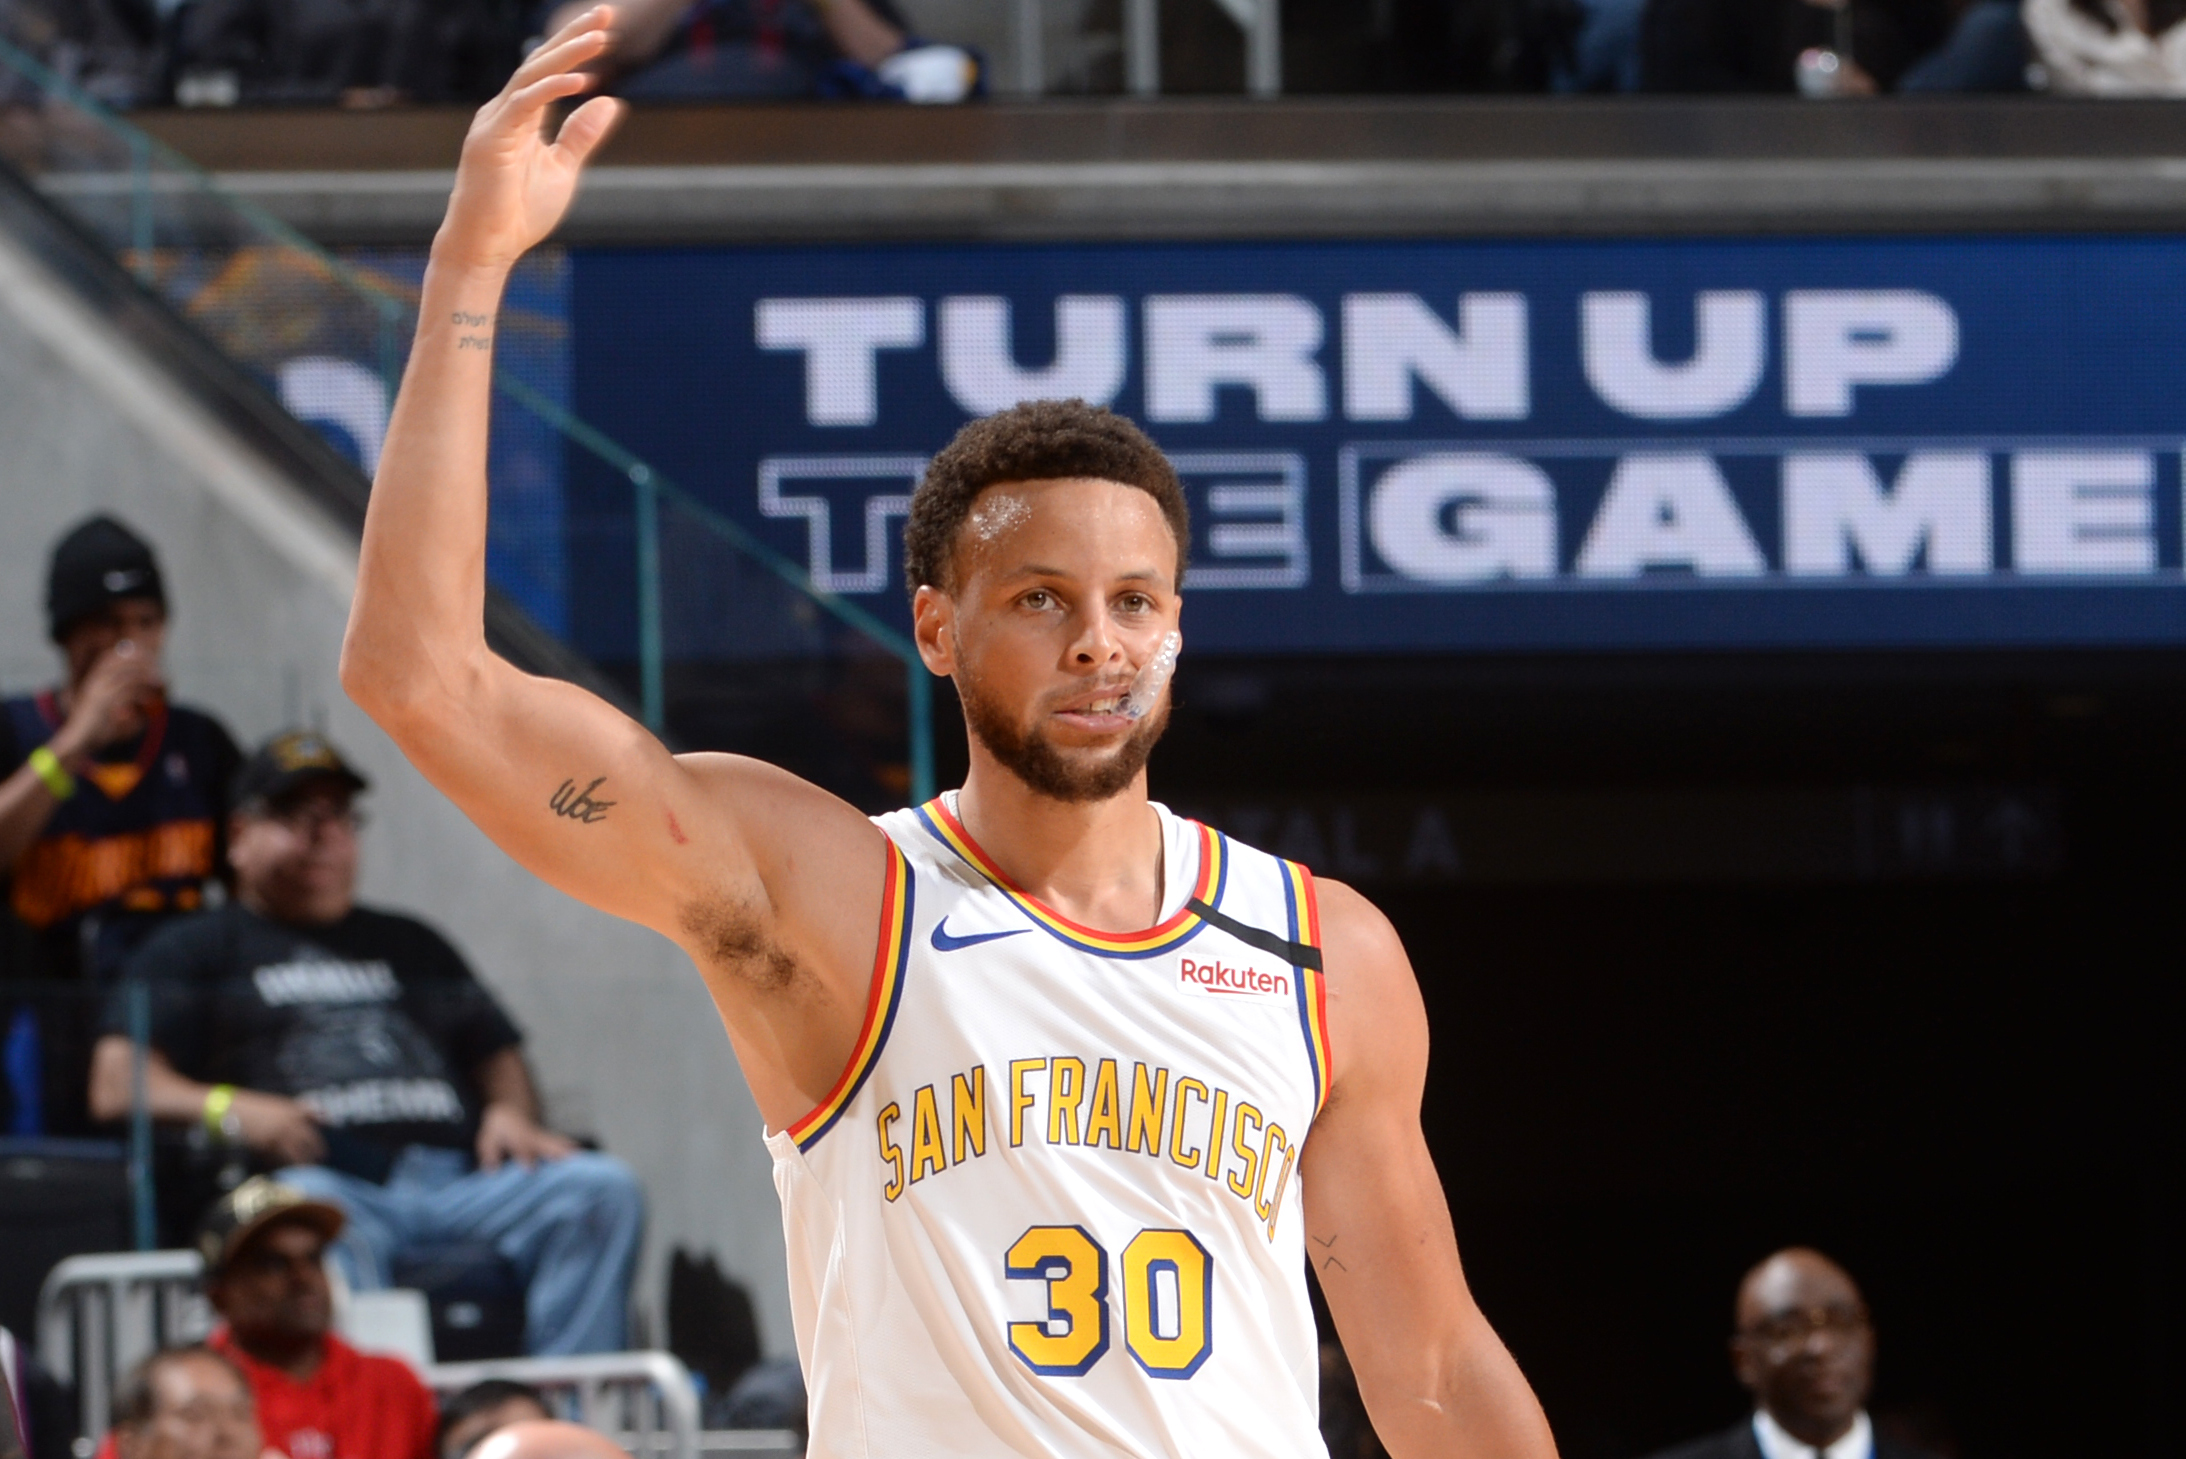 Warriors' Stephen Curry cleared to play vs. Clippers